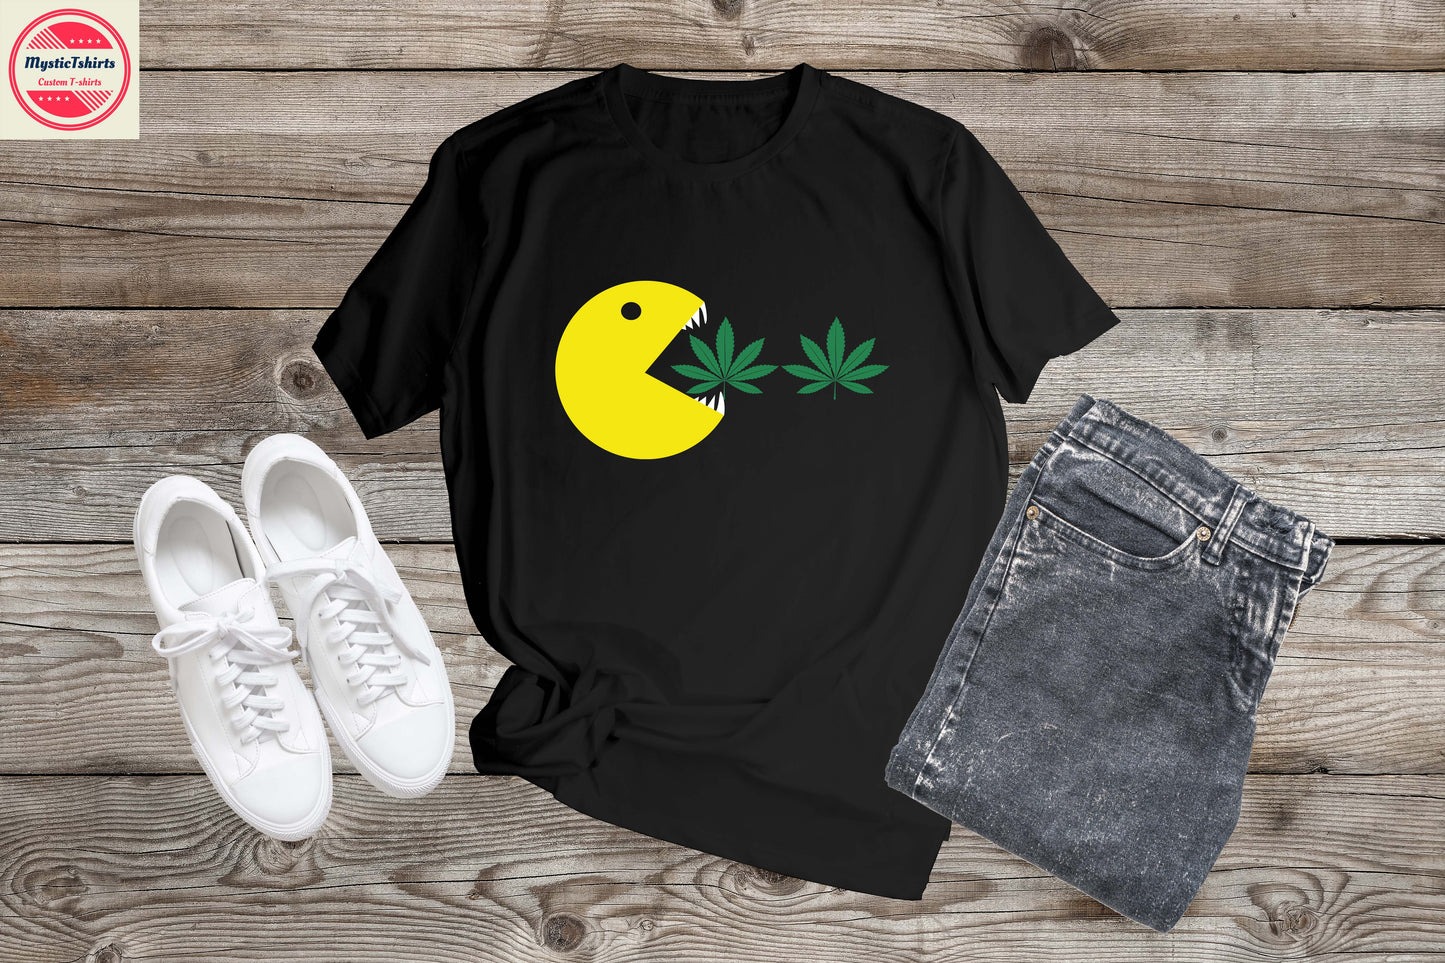 152. FUN WEED, Custom Made Shirt, Personalized T-Shirt, Custom Text, Make Your Own Shirt, Custom Tee